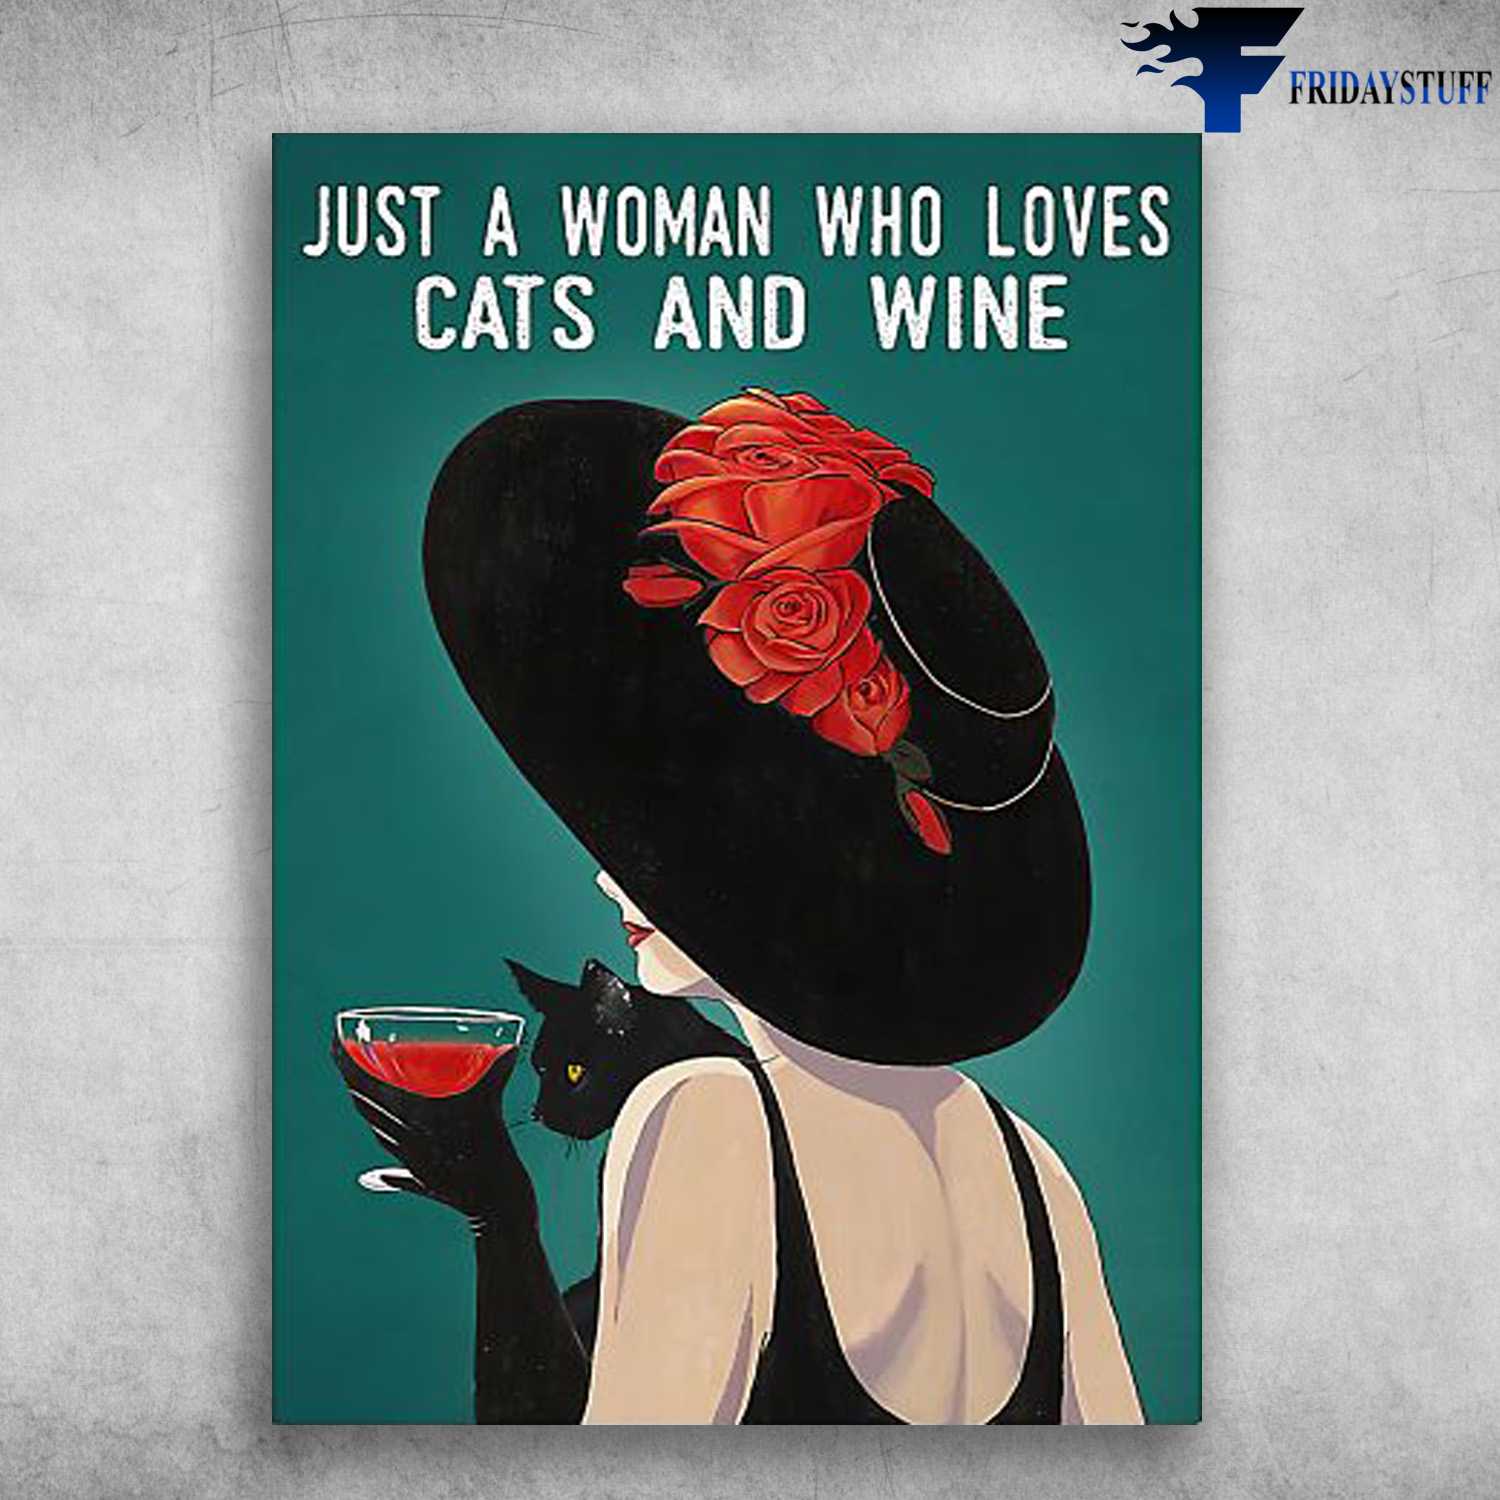 Lady Cat And Wine, Drinking Wine, Black Cat - Just A Woman Who Loves, Cats And Wine